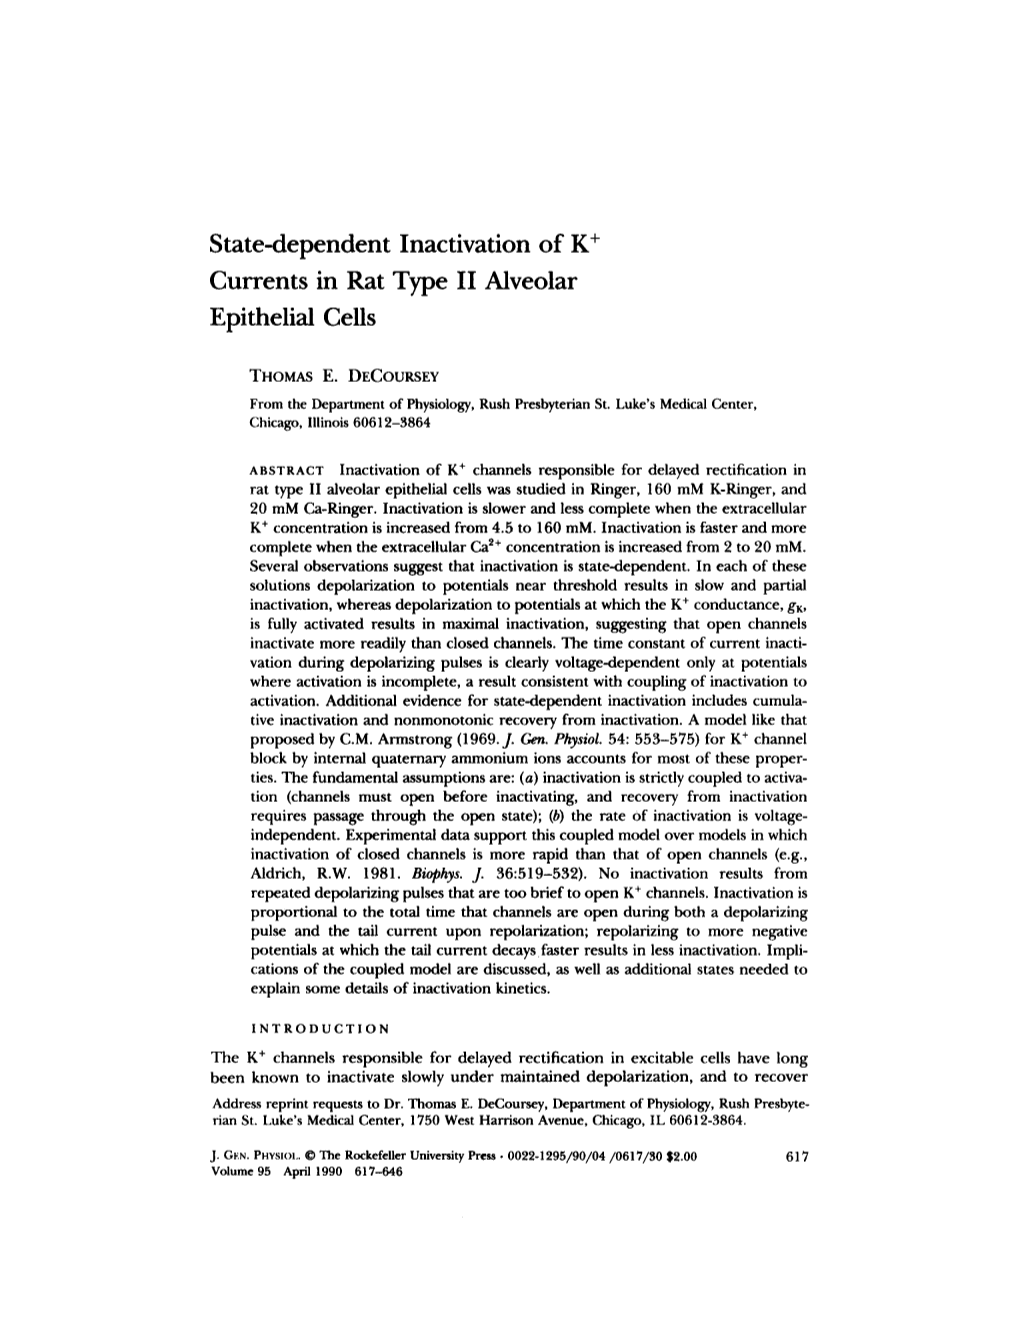 State-Dependent Inactivation of K + Currents in Rat Type II Alveolar Epithelial Cells